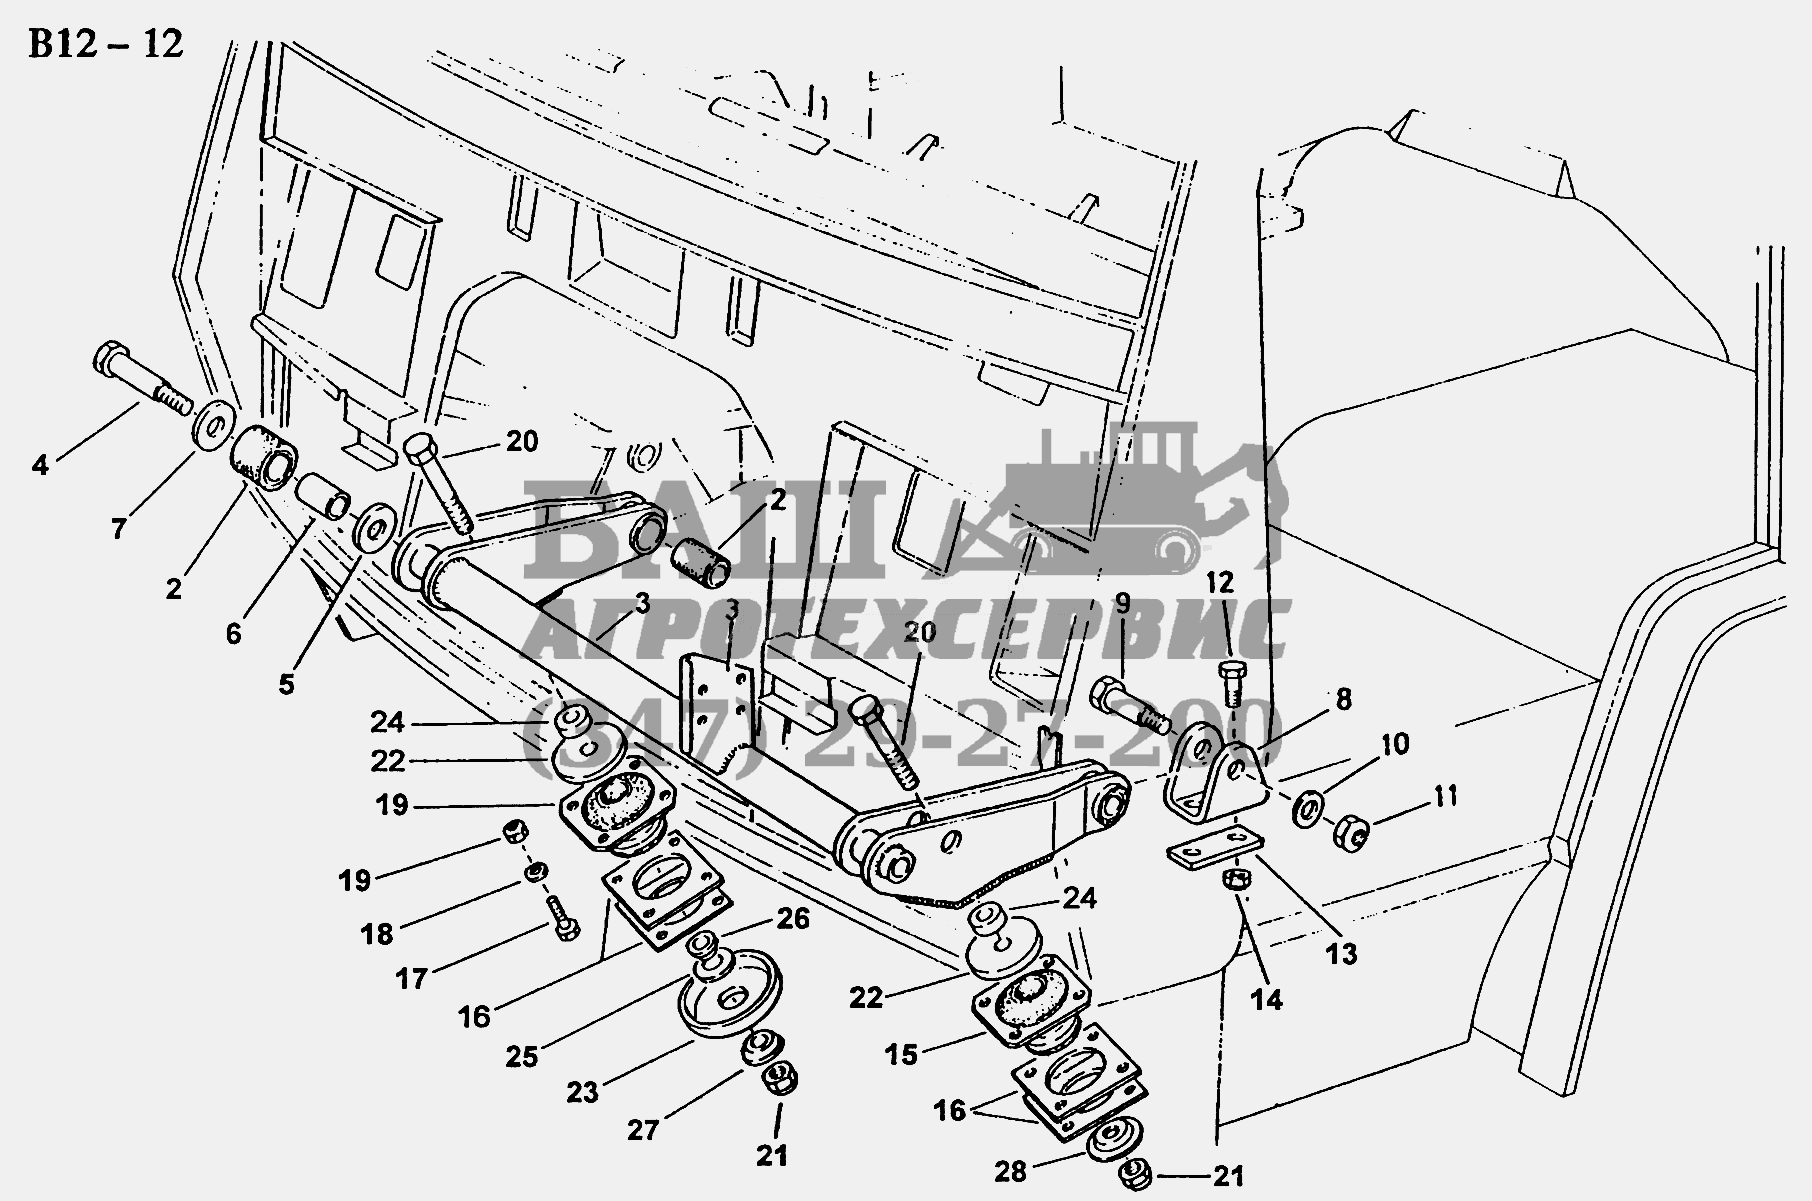 DRIVER'S CAB SUPPORT FRONT (B12-12) Sinotruk 6x4 Tractor (371)